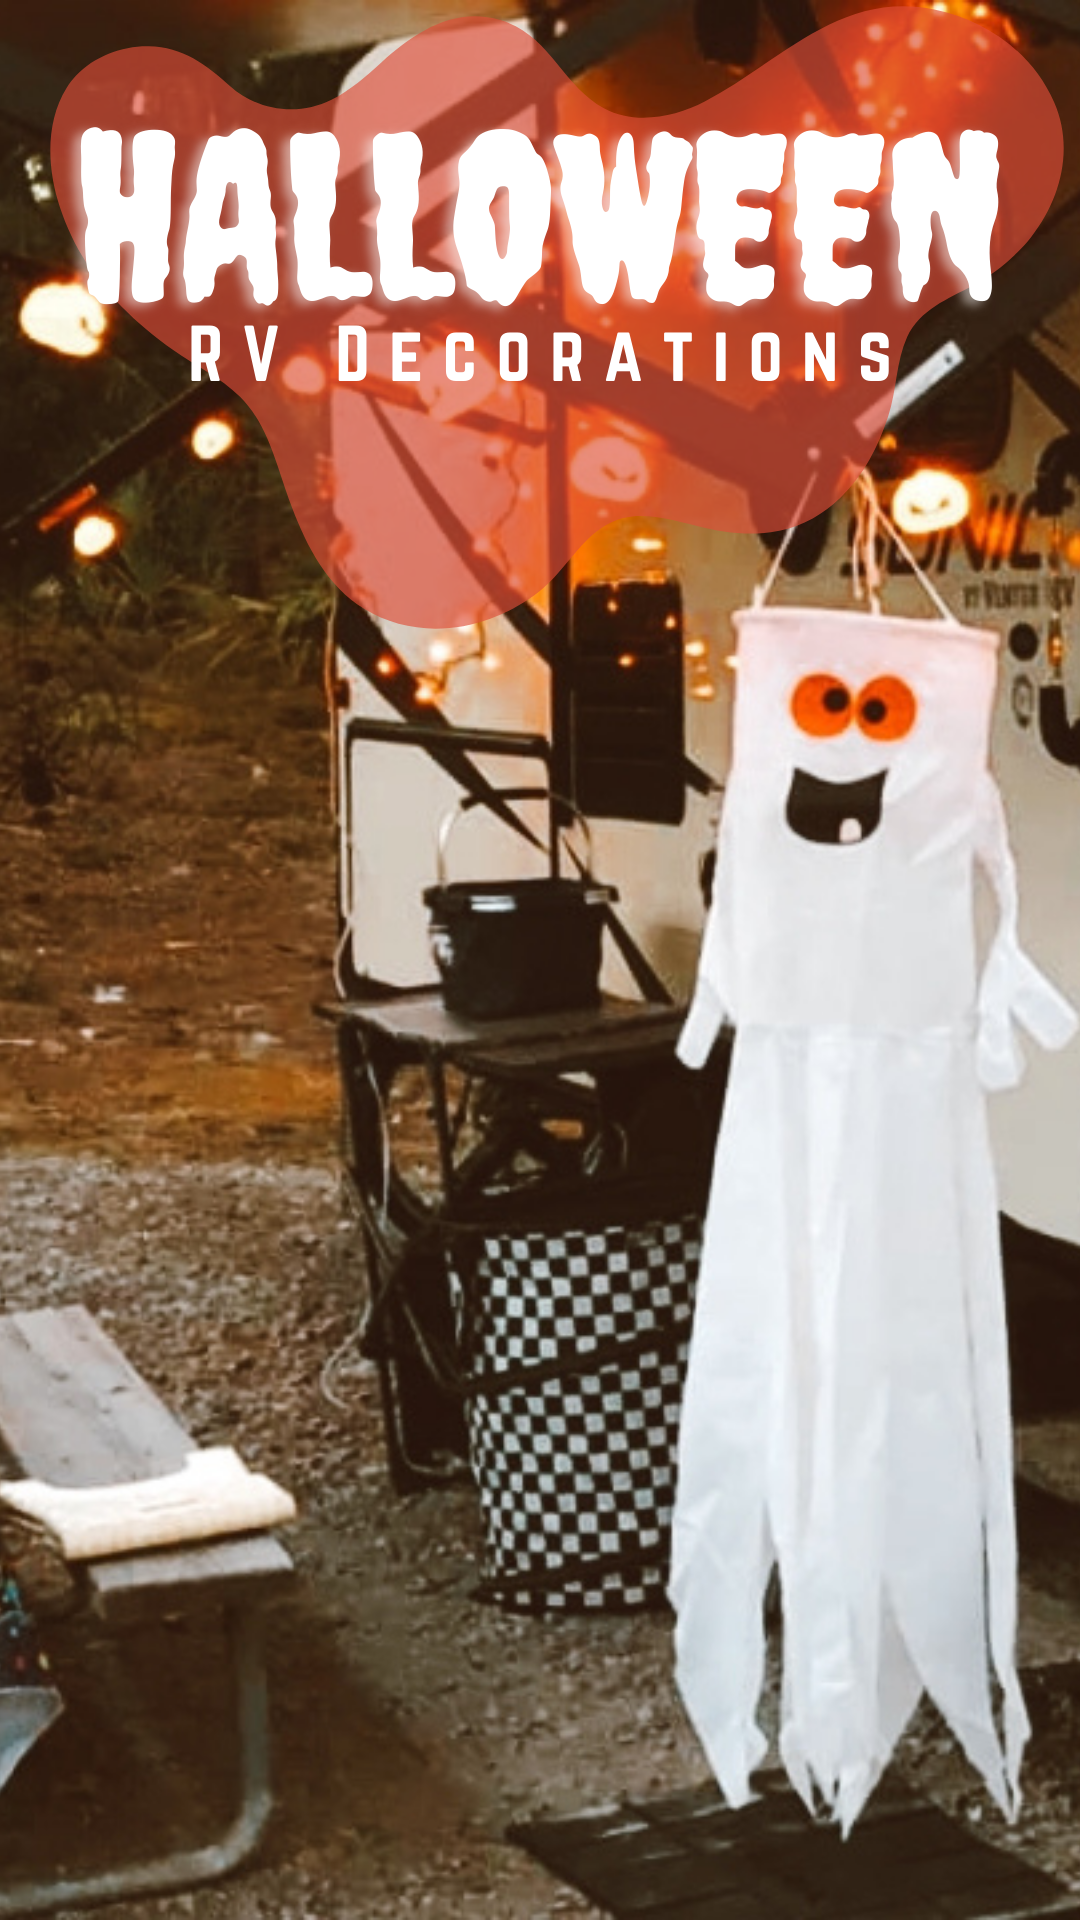 A ghost decoration outside an RV